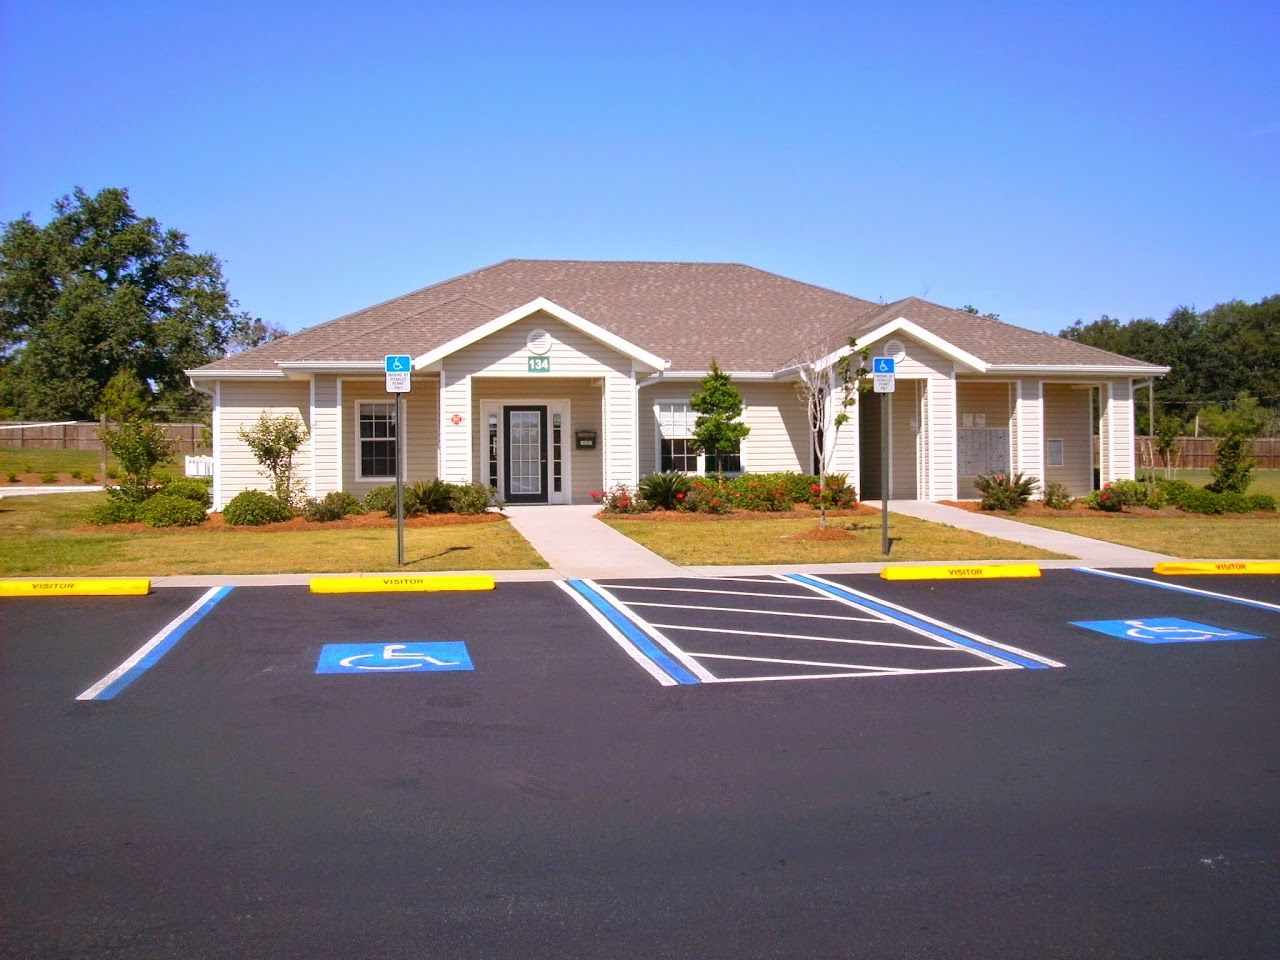 Photo of ARBOURS AT MADISON. Affordable housing located at 134 SW ARBOUR CIR MADISON, FL 32340